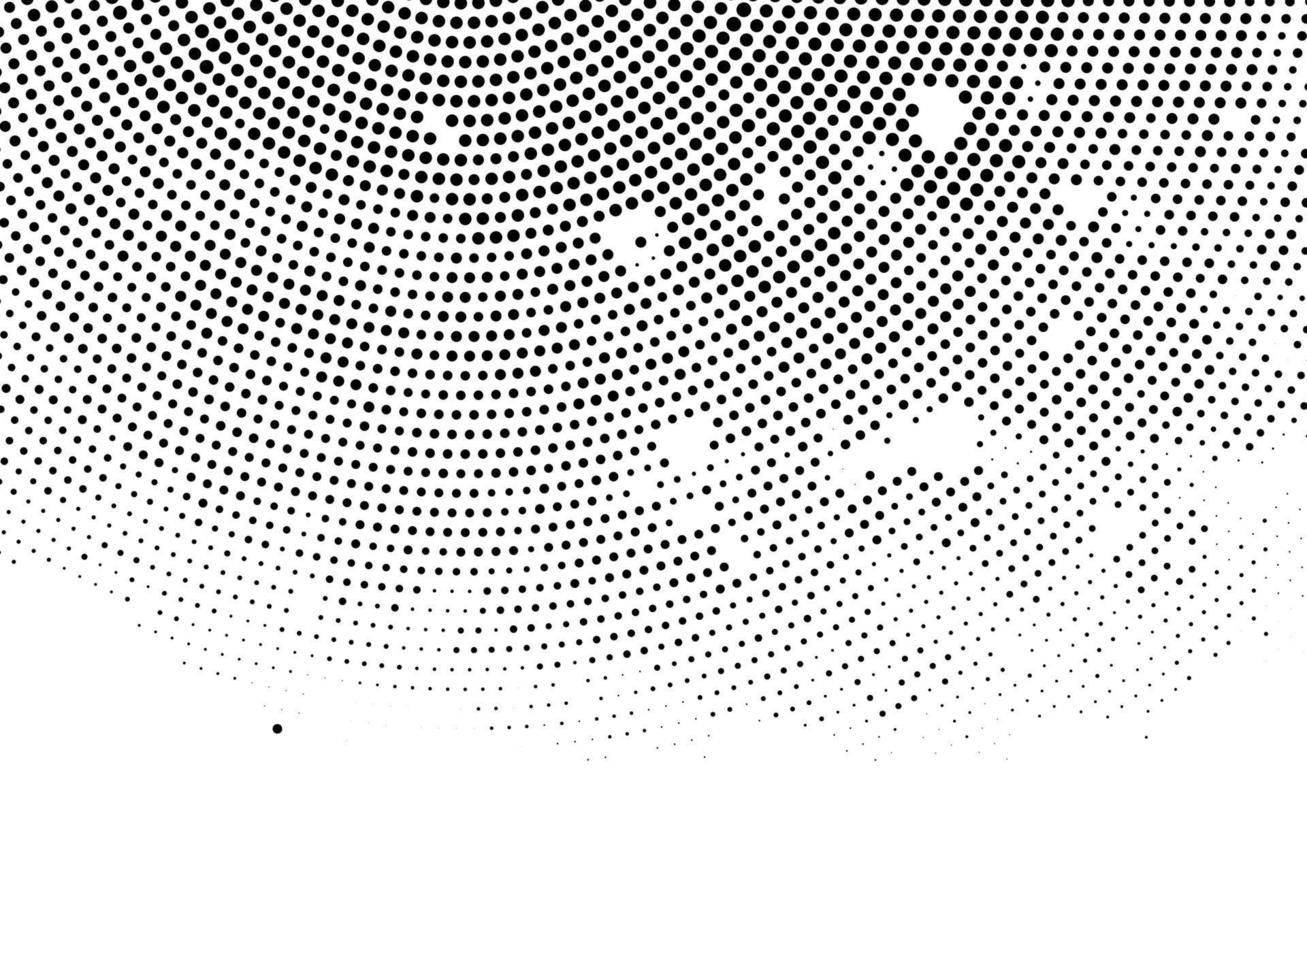 Abstract modern halftone pattern background vector